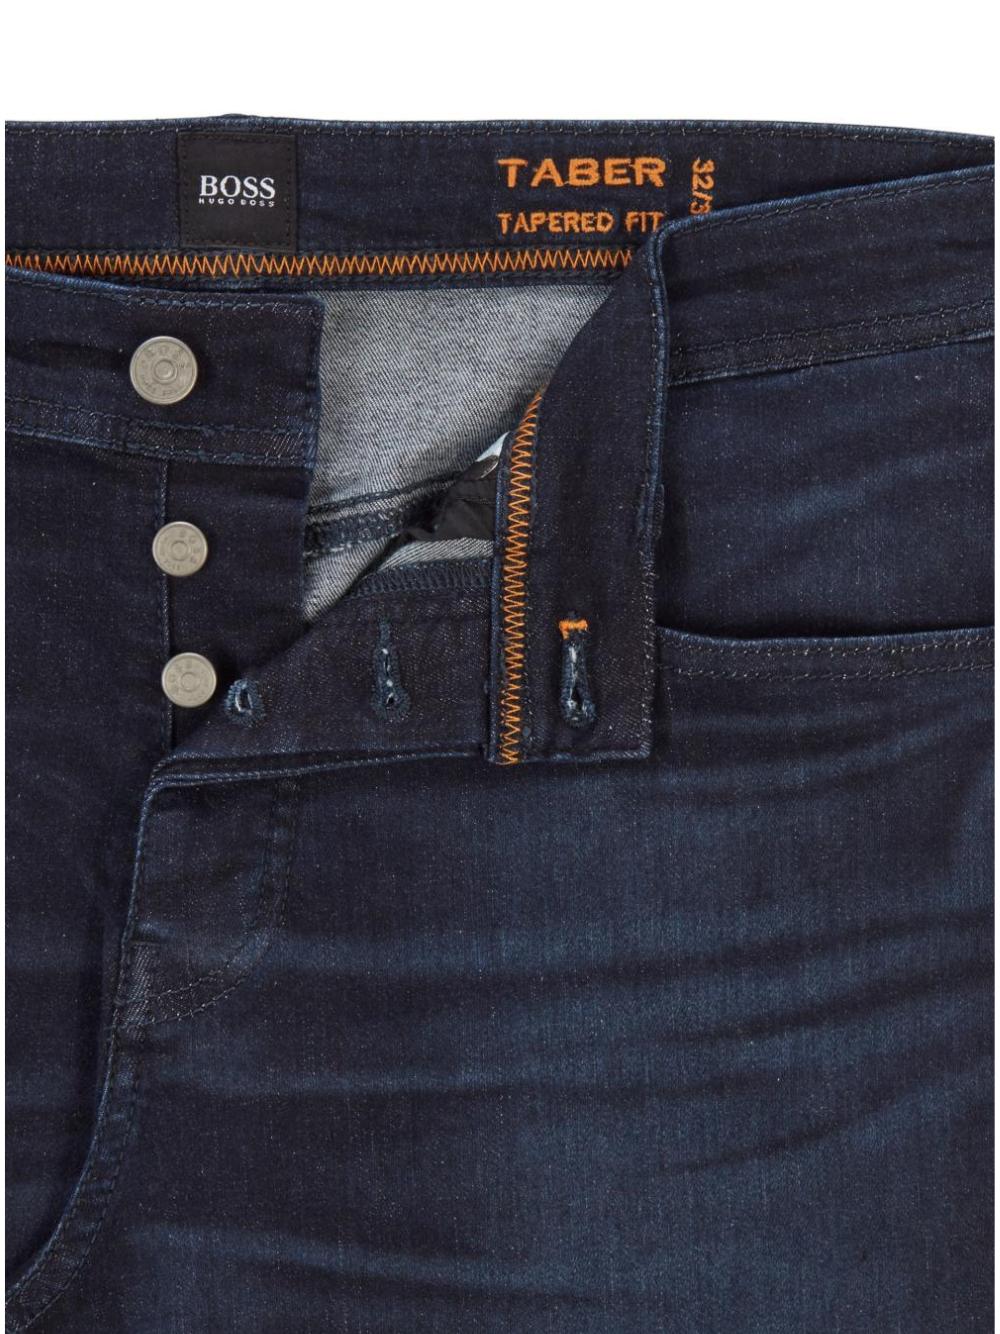 BOSS by HUGO BOSS Boss Tapered Fit Jeans Navy in Blue for Men | Lyst